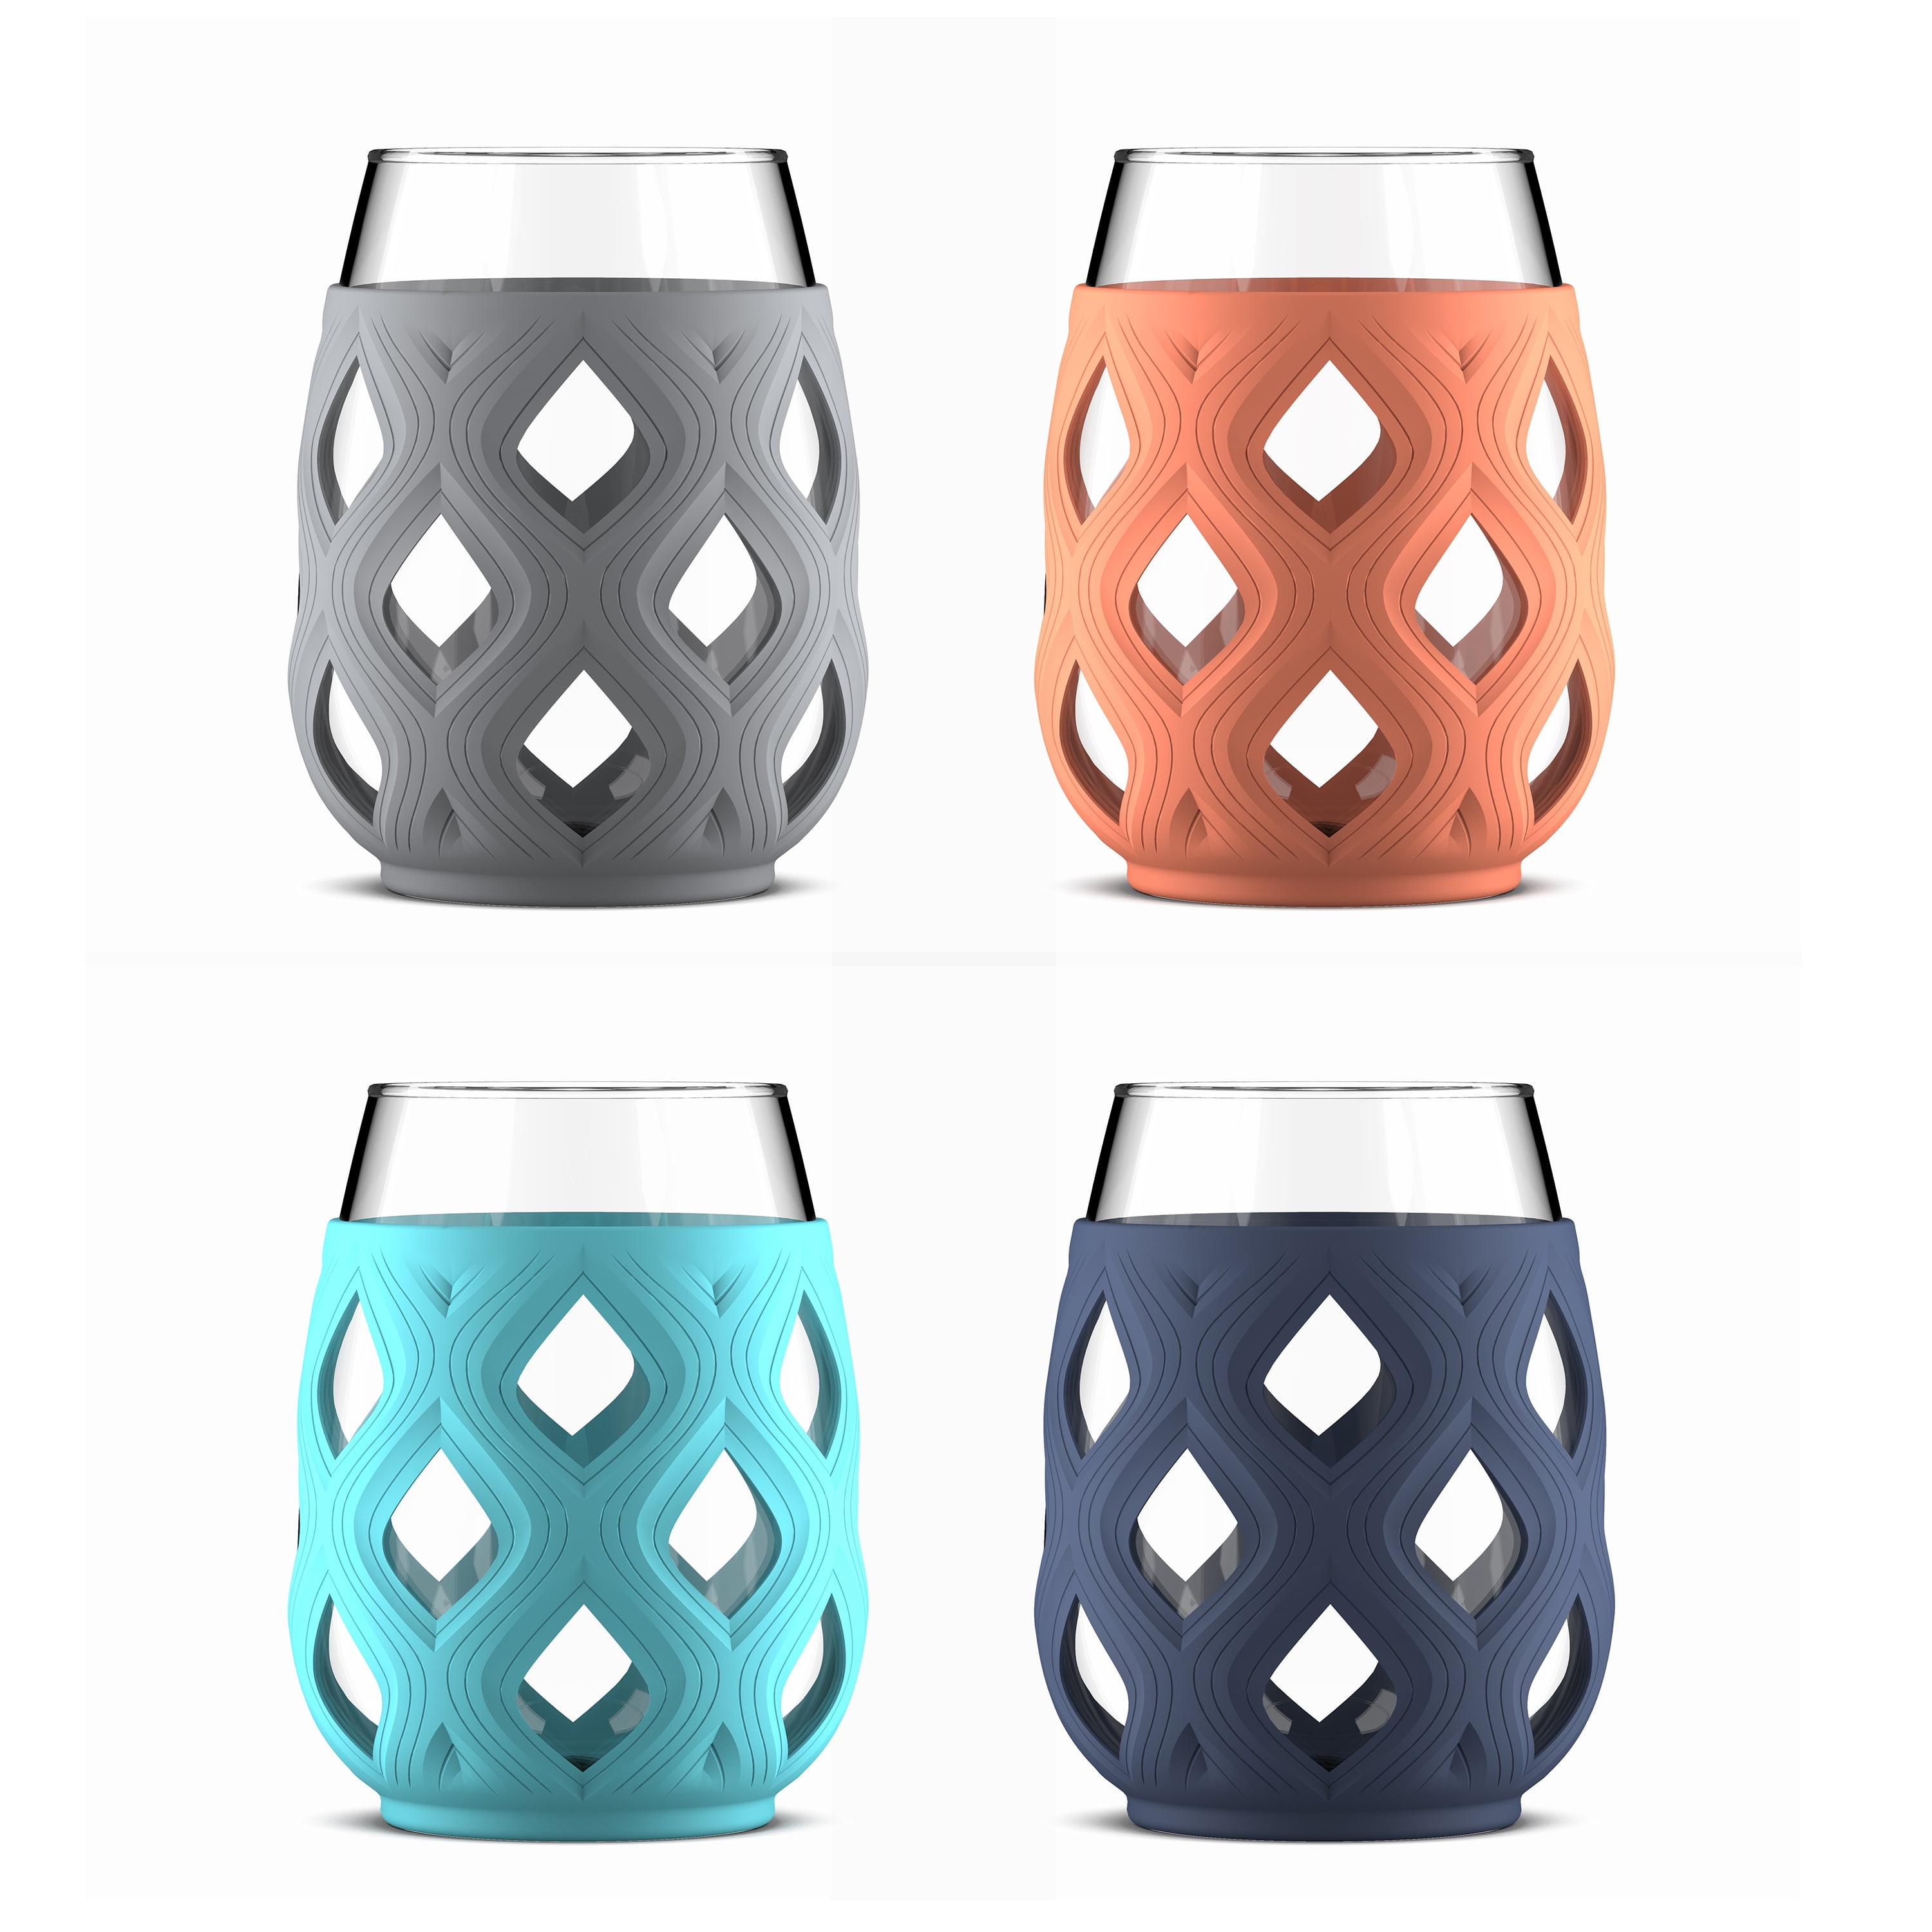 Ello Cru Stemless Wine Glass Set with Silicone Protection, 4 Pack, Blue  Lagoon 